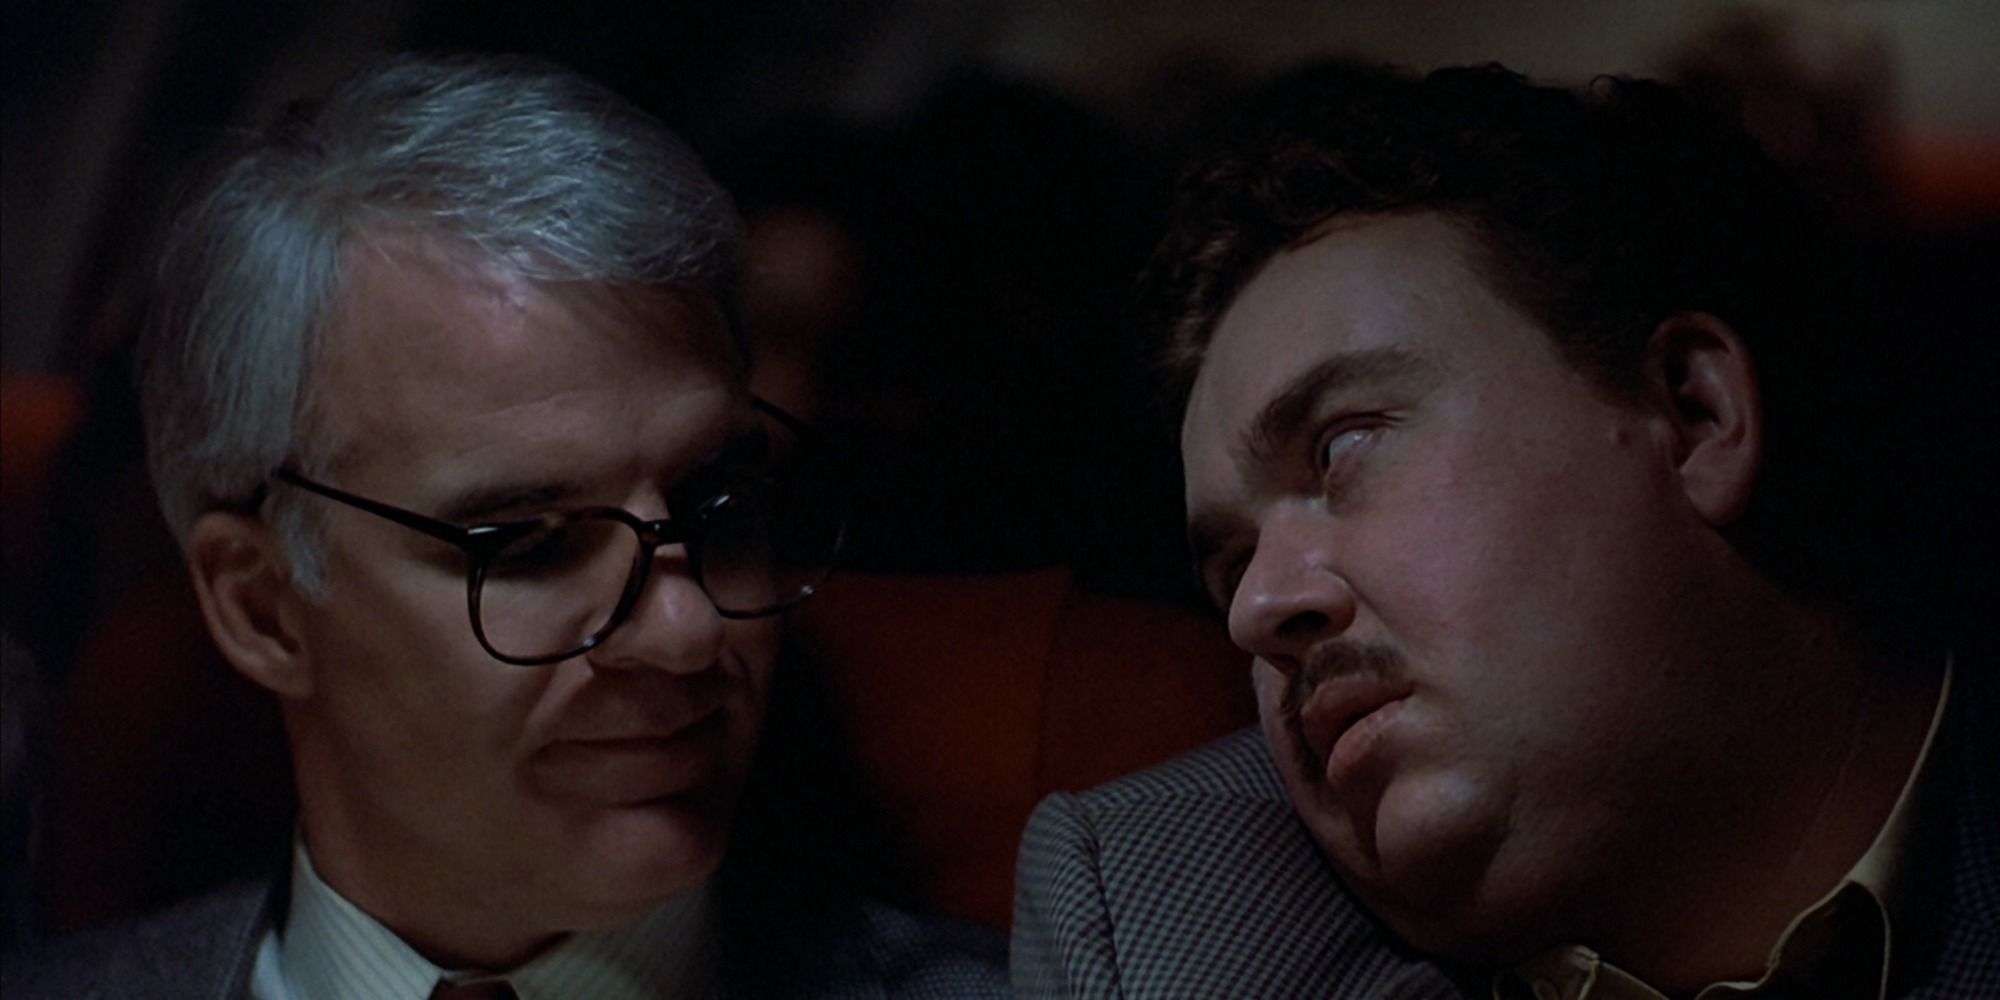 Del looking at Neal on the flight in Planes, Trains and Automobiles